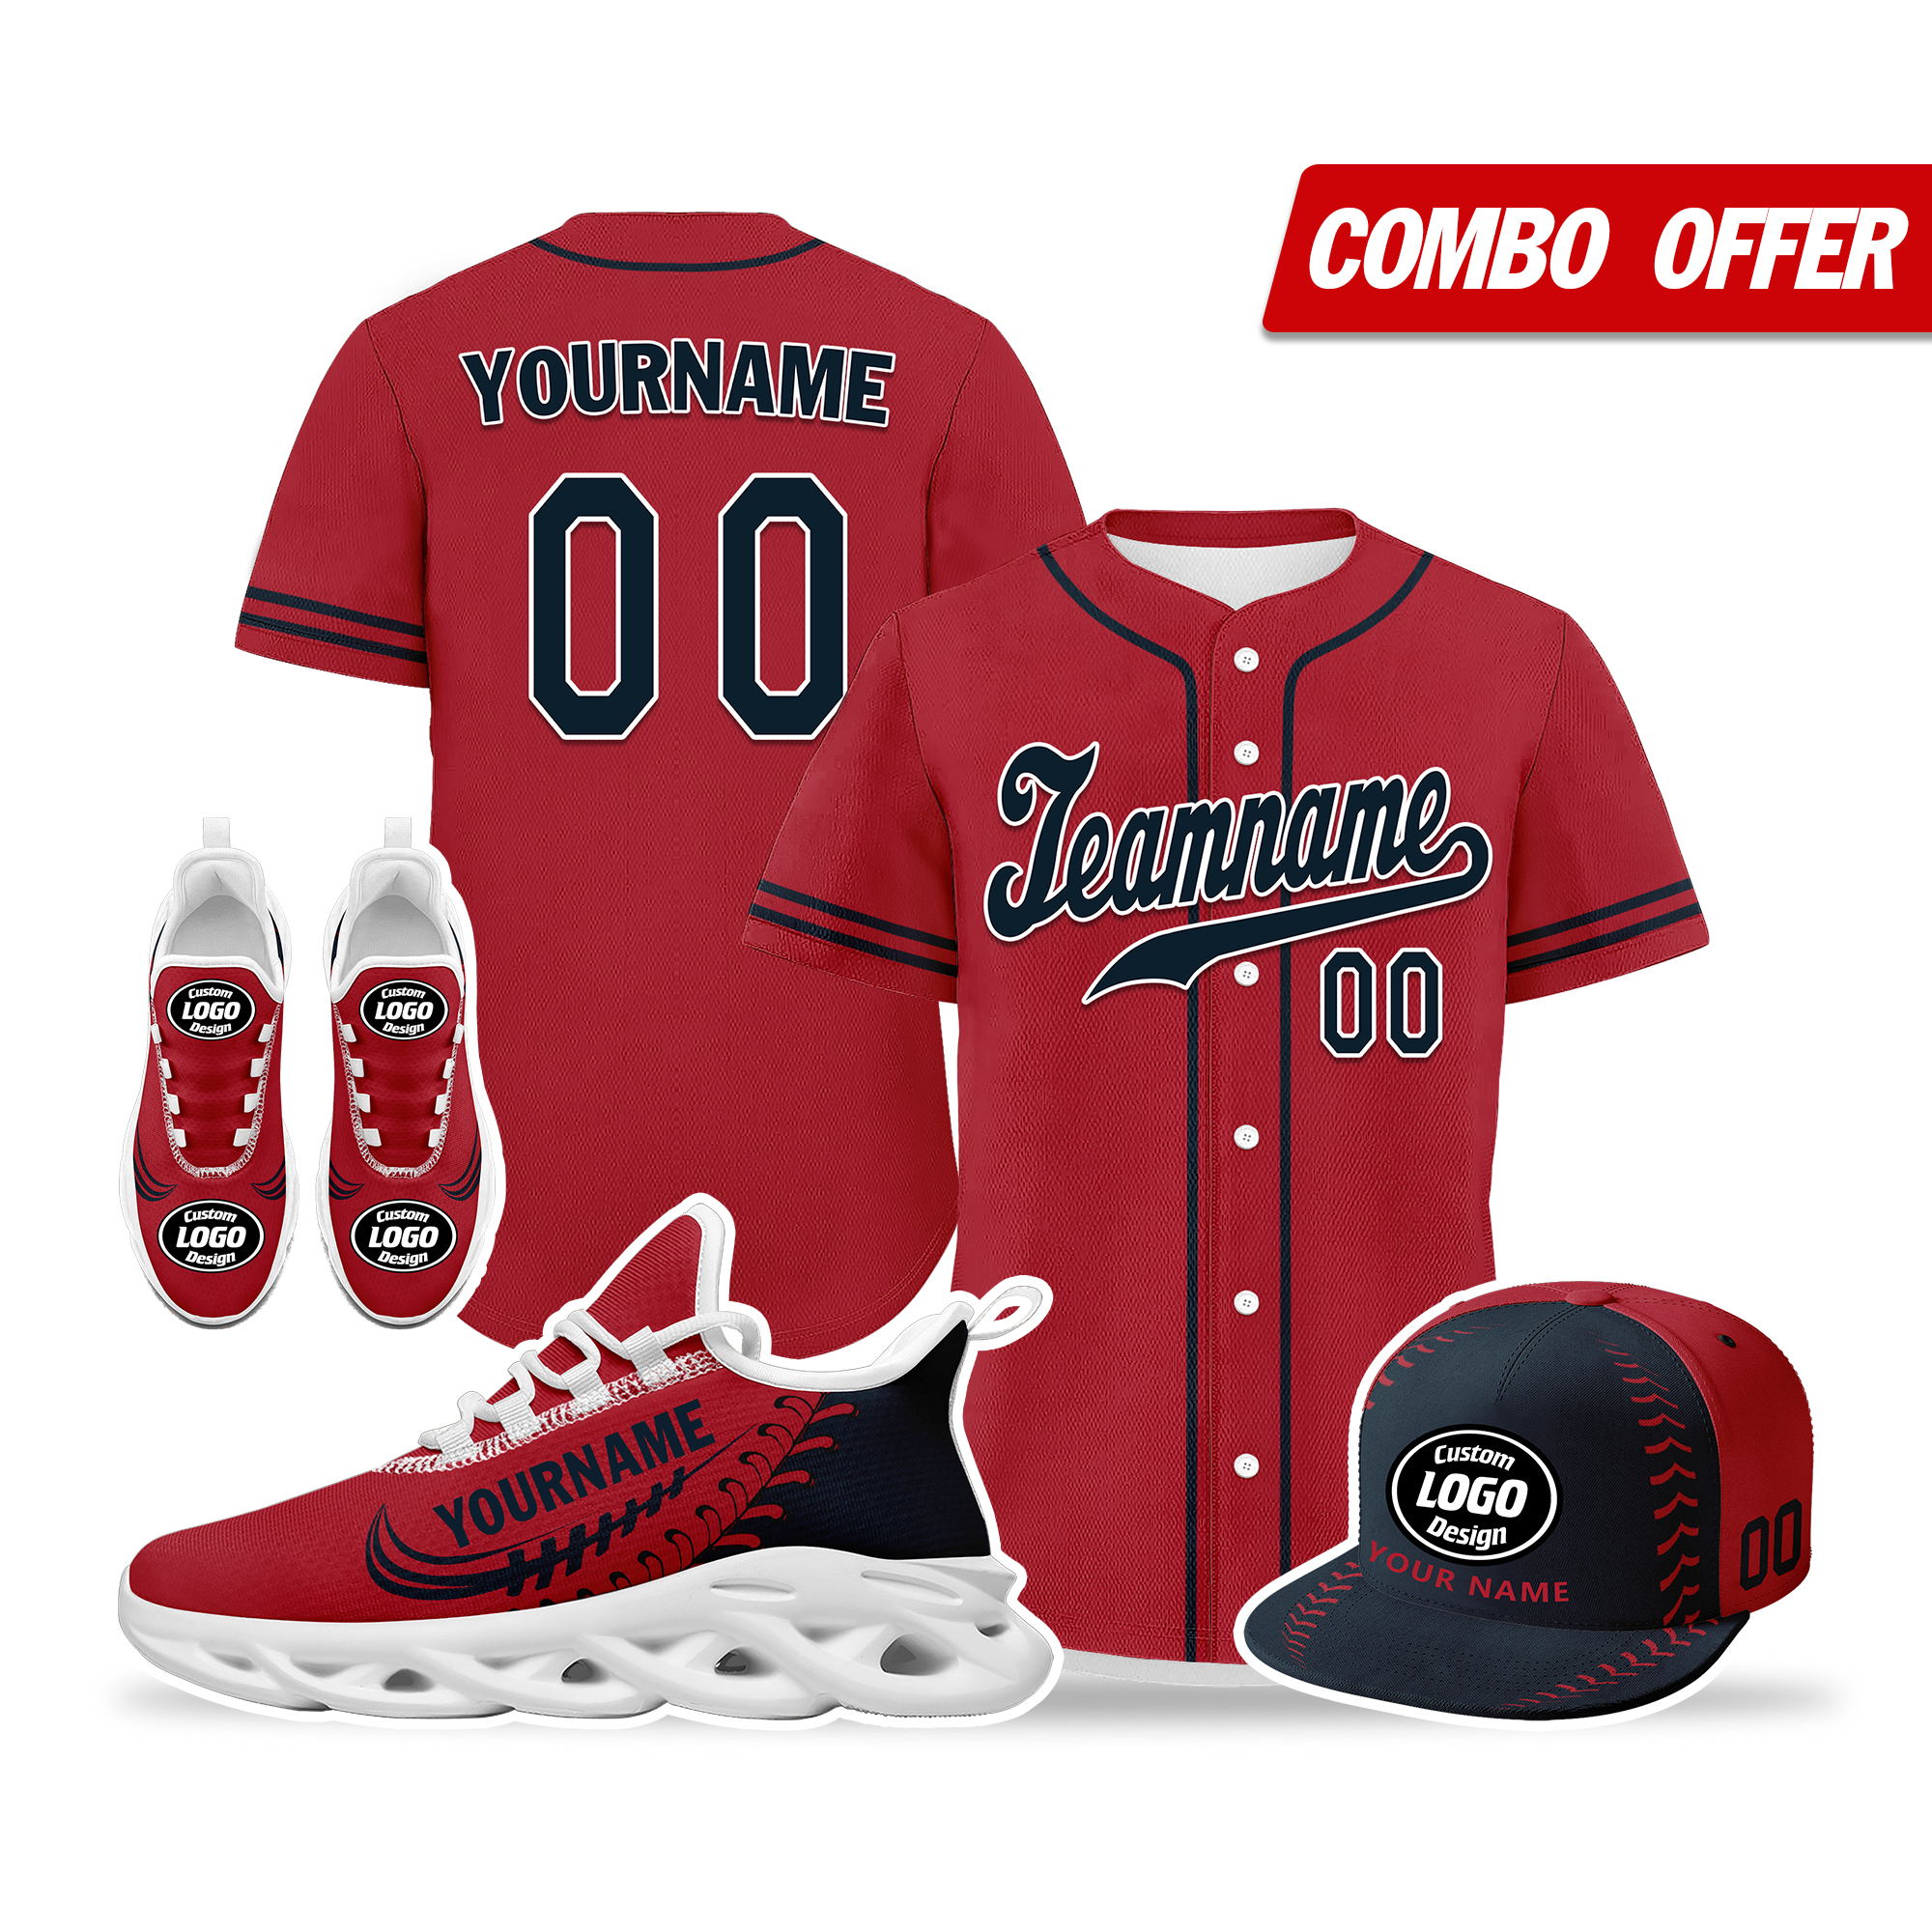 custom-baseball-jersey-sneaker-hat-kits-personalized-design-printed-logo-picture-photo-on-sports-suits-for-men-and-women-claret-black-white-sole-sport-shoes-ZH-24020050-6w